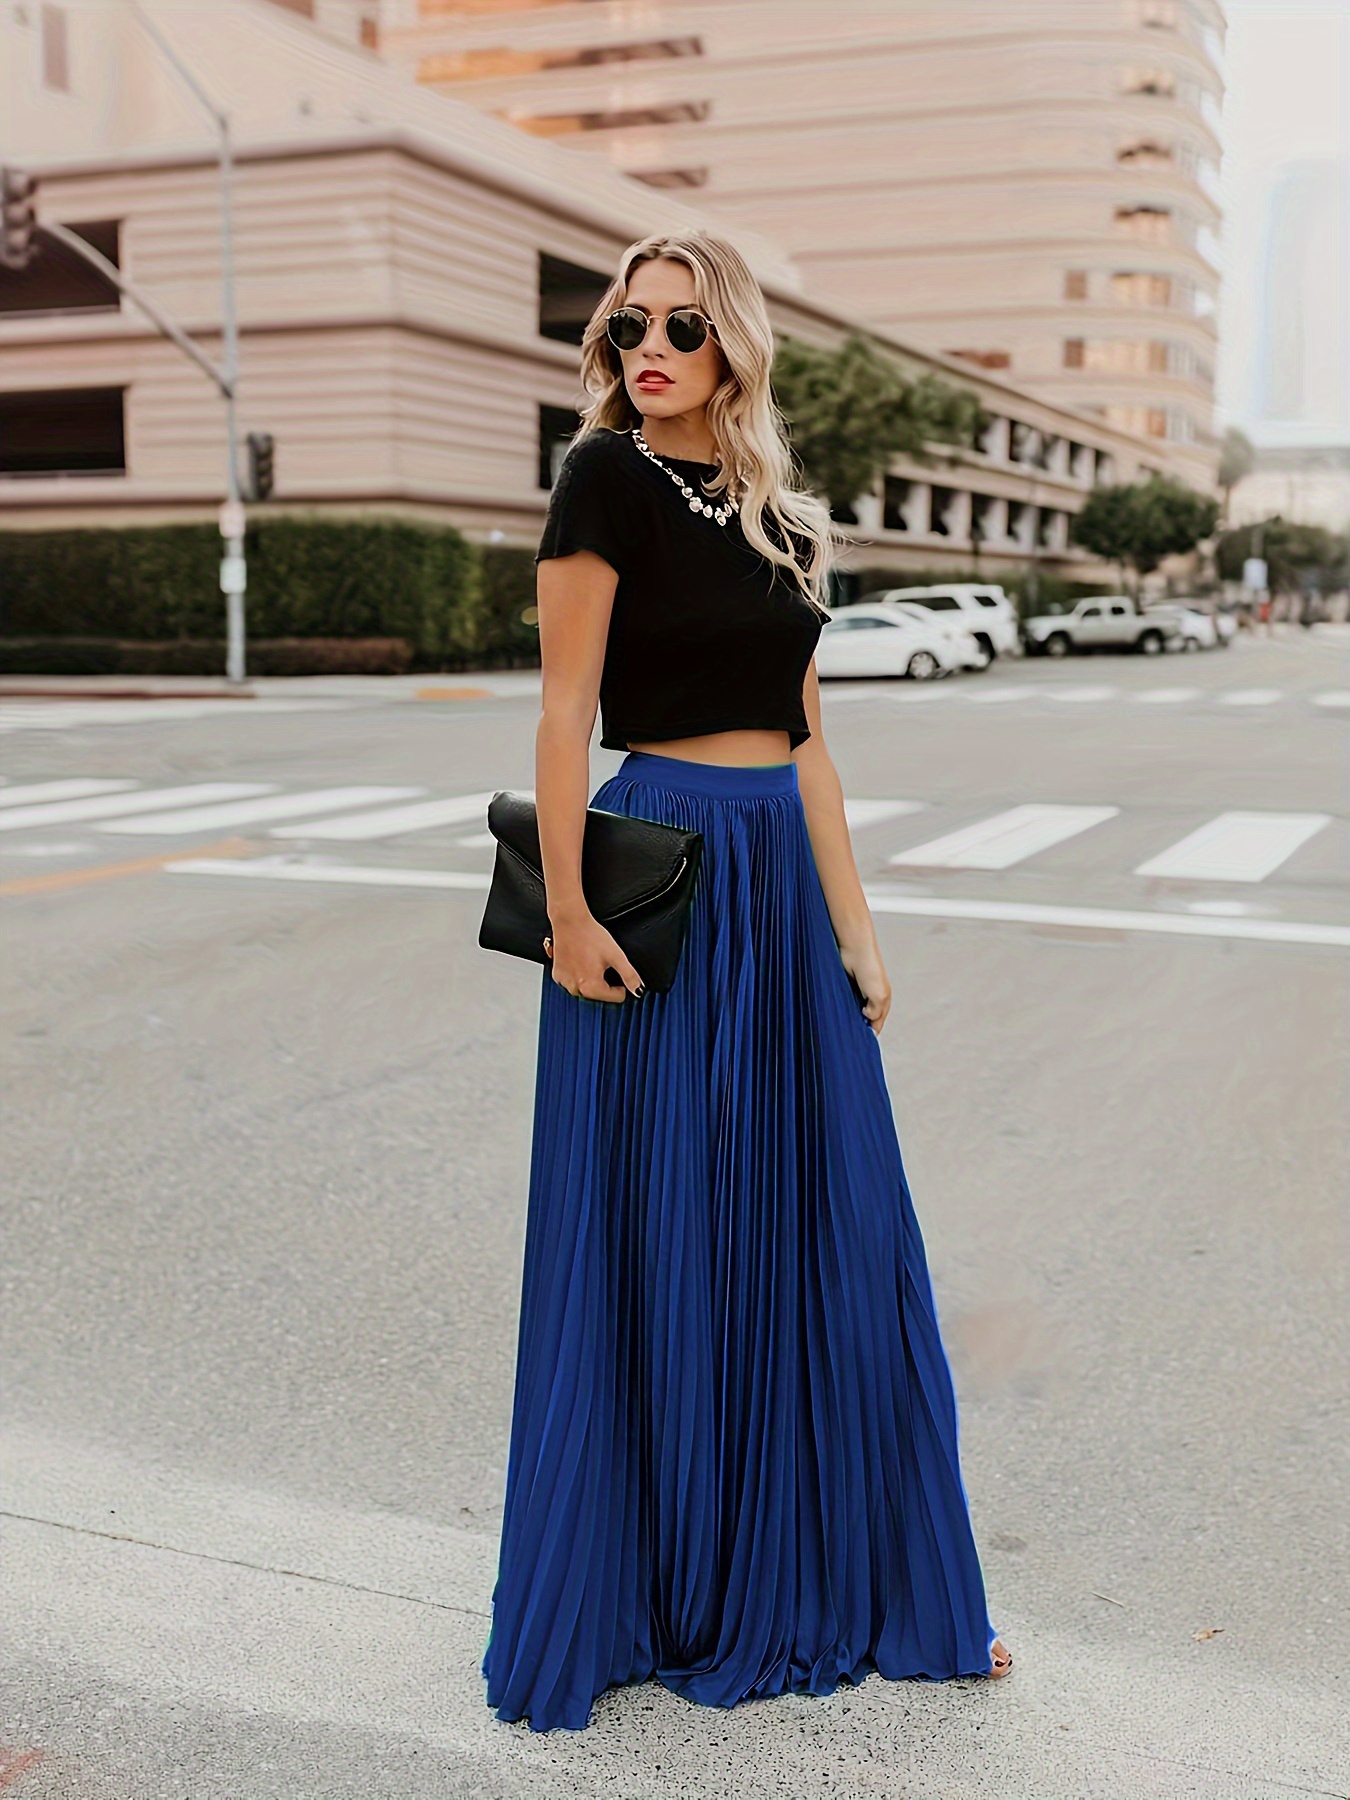 Ways To Wear Royal Blue For Fall.  Royal blue skirts, Royal blue dress  outfit, Blue skirt outfits